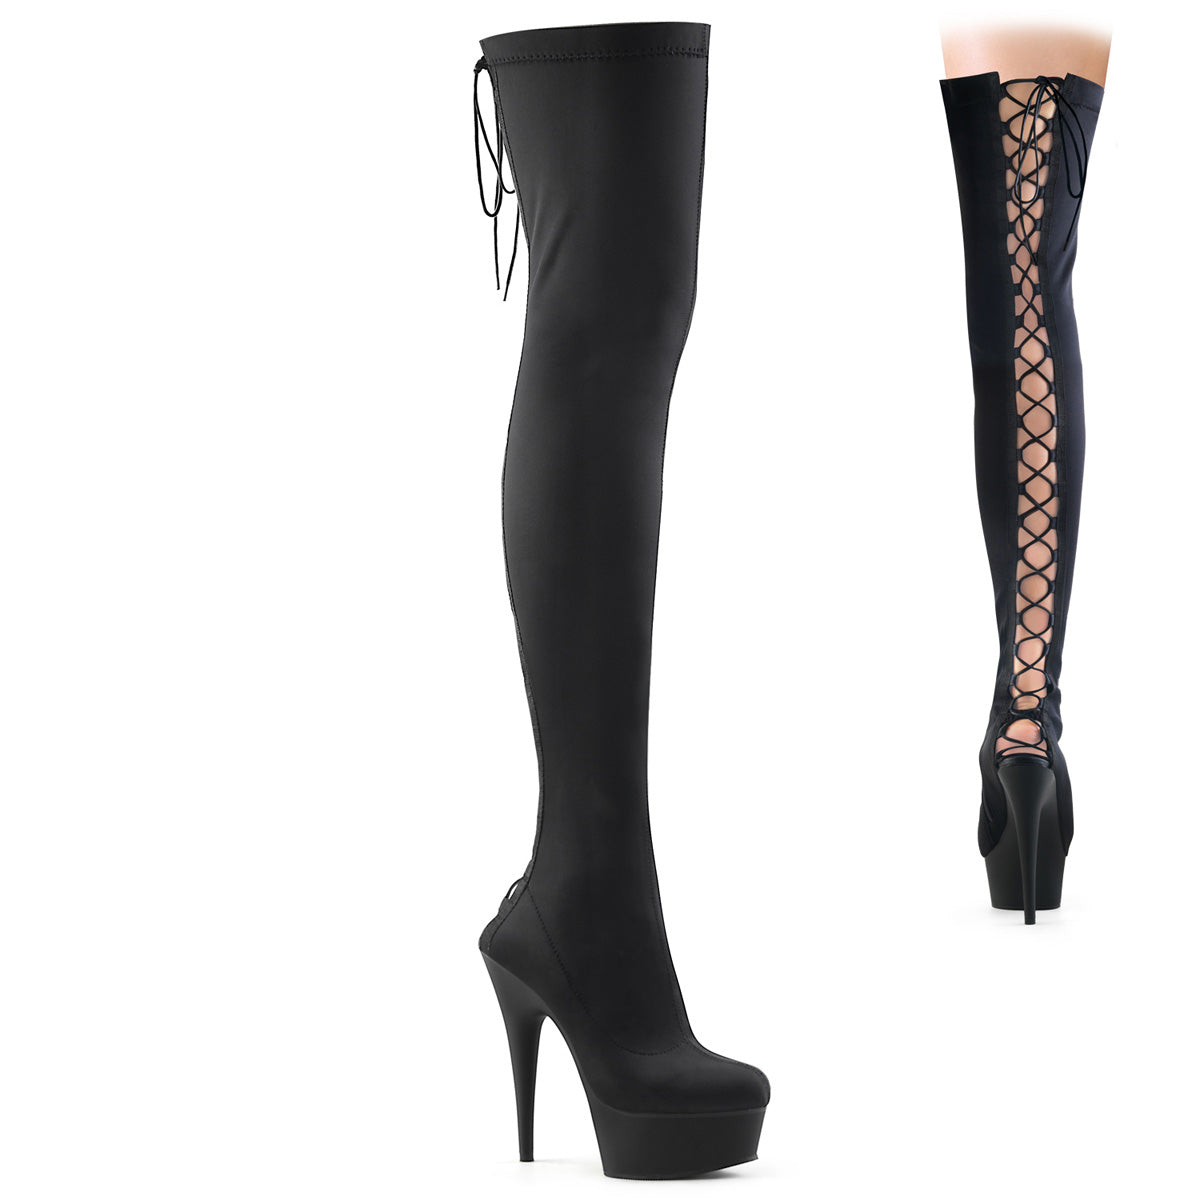 DELIGHT-3003 Black Thigh High Boots